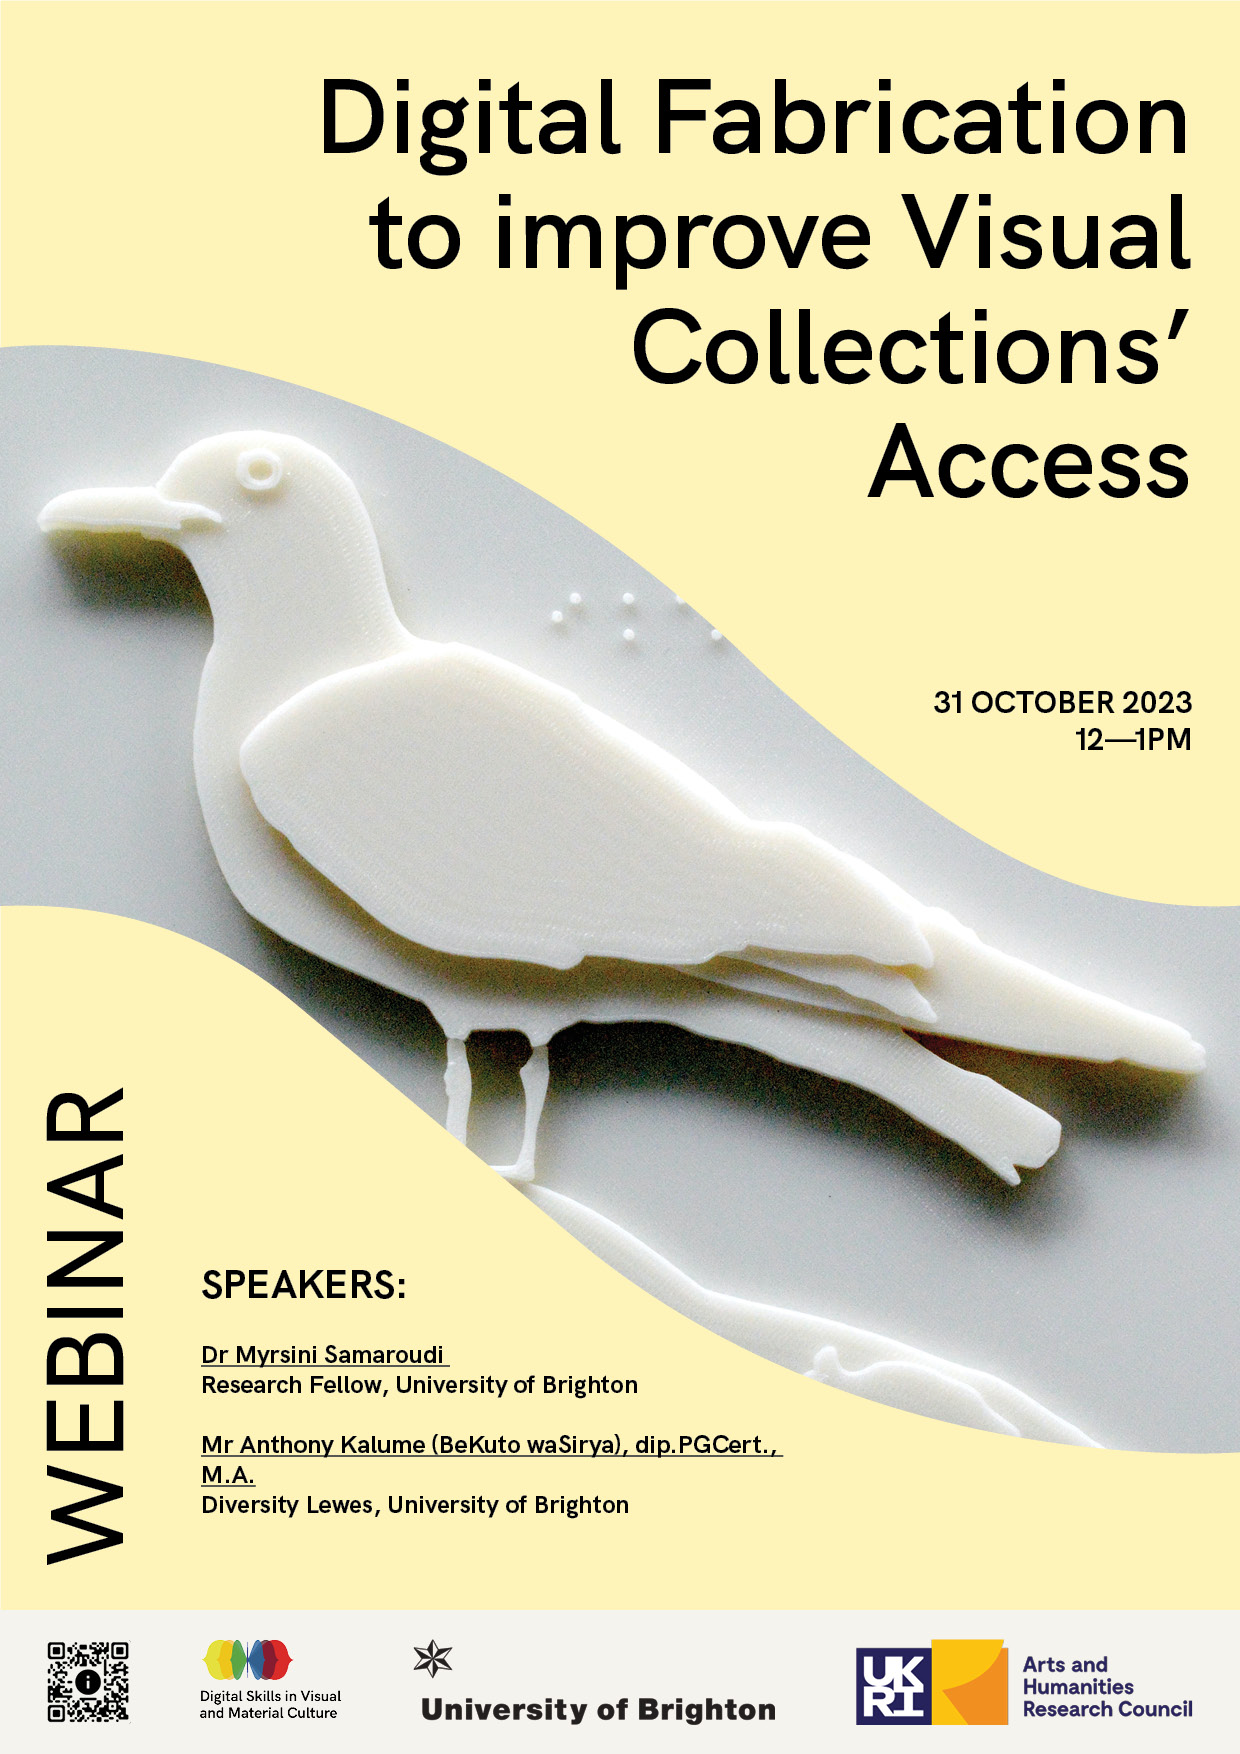 Webinar: Digital Fabrication to Improve Visual Collections’ Access| October 31 2023, 12:00-1:00pm